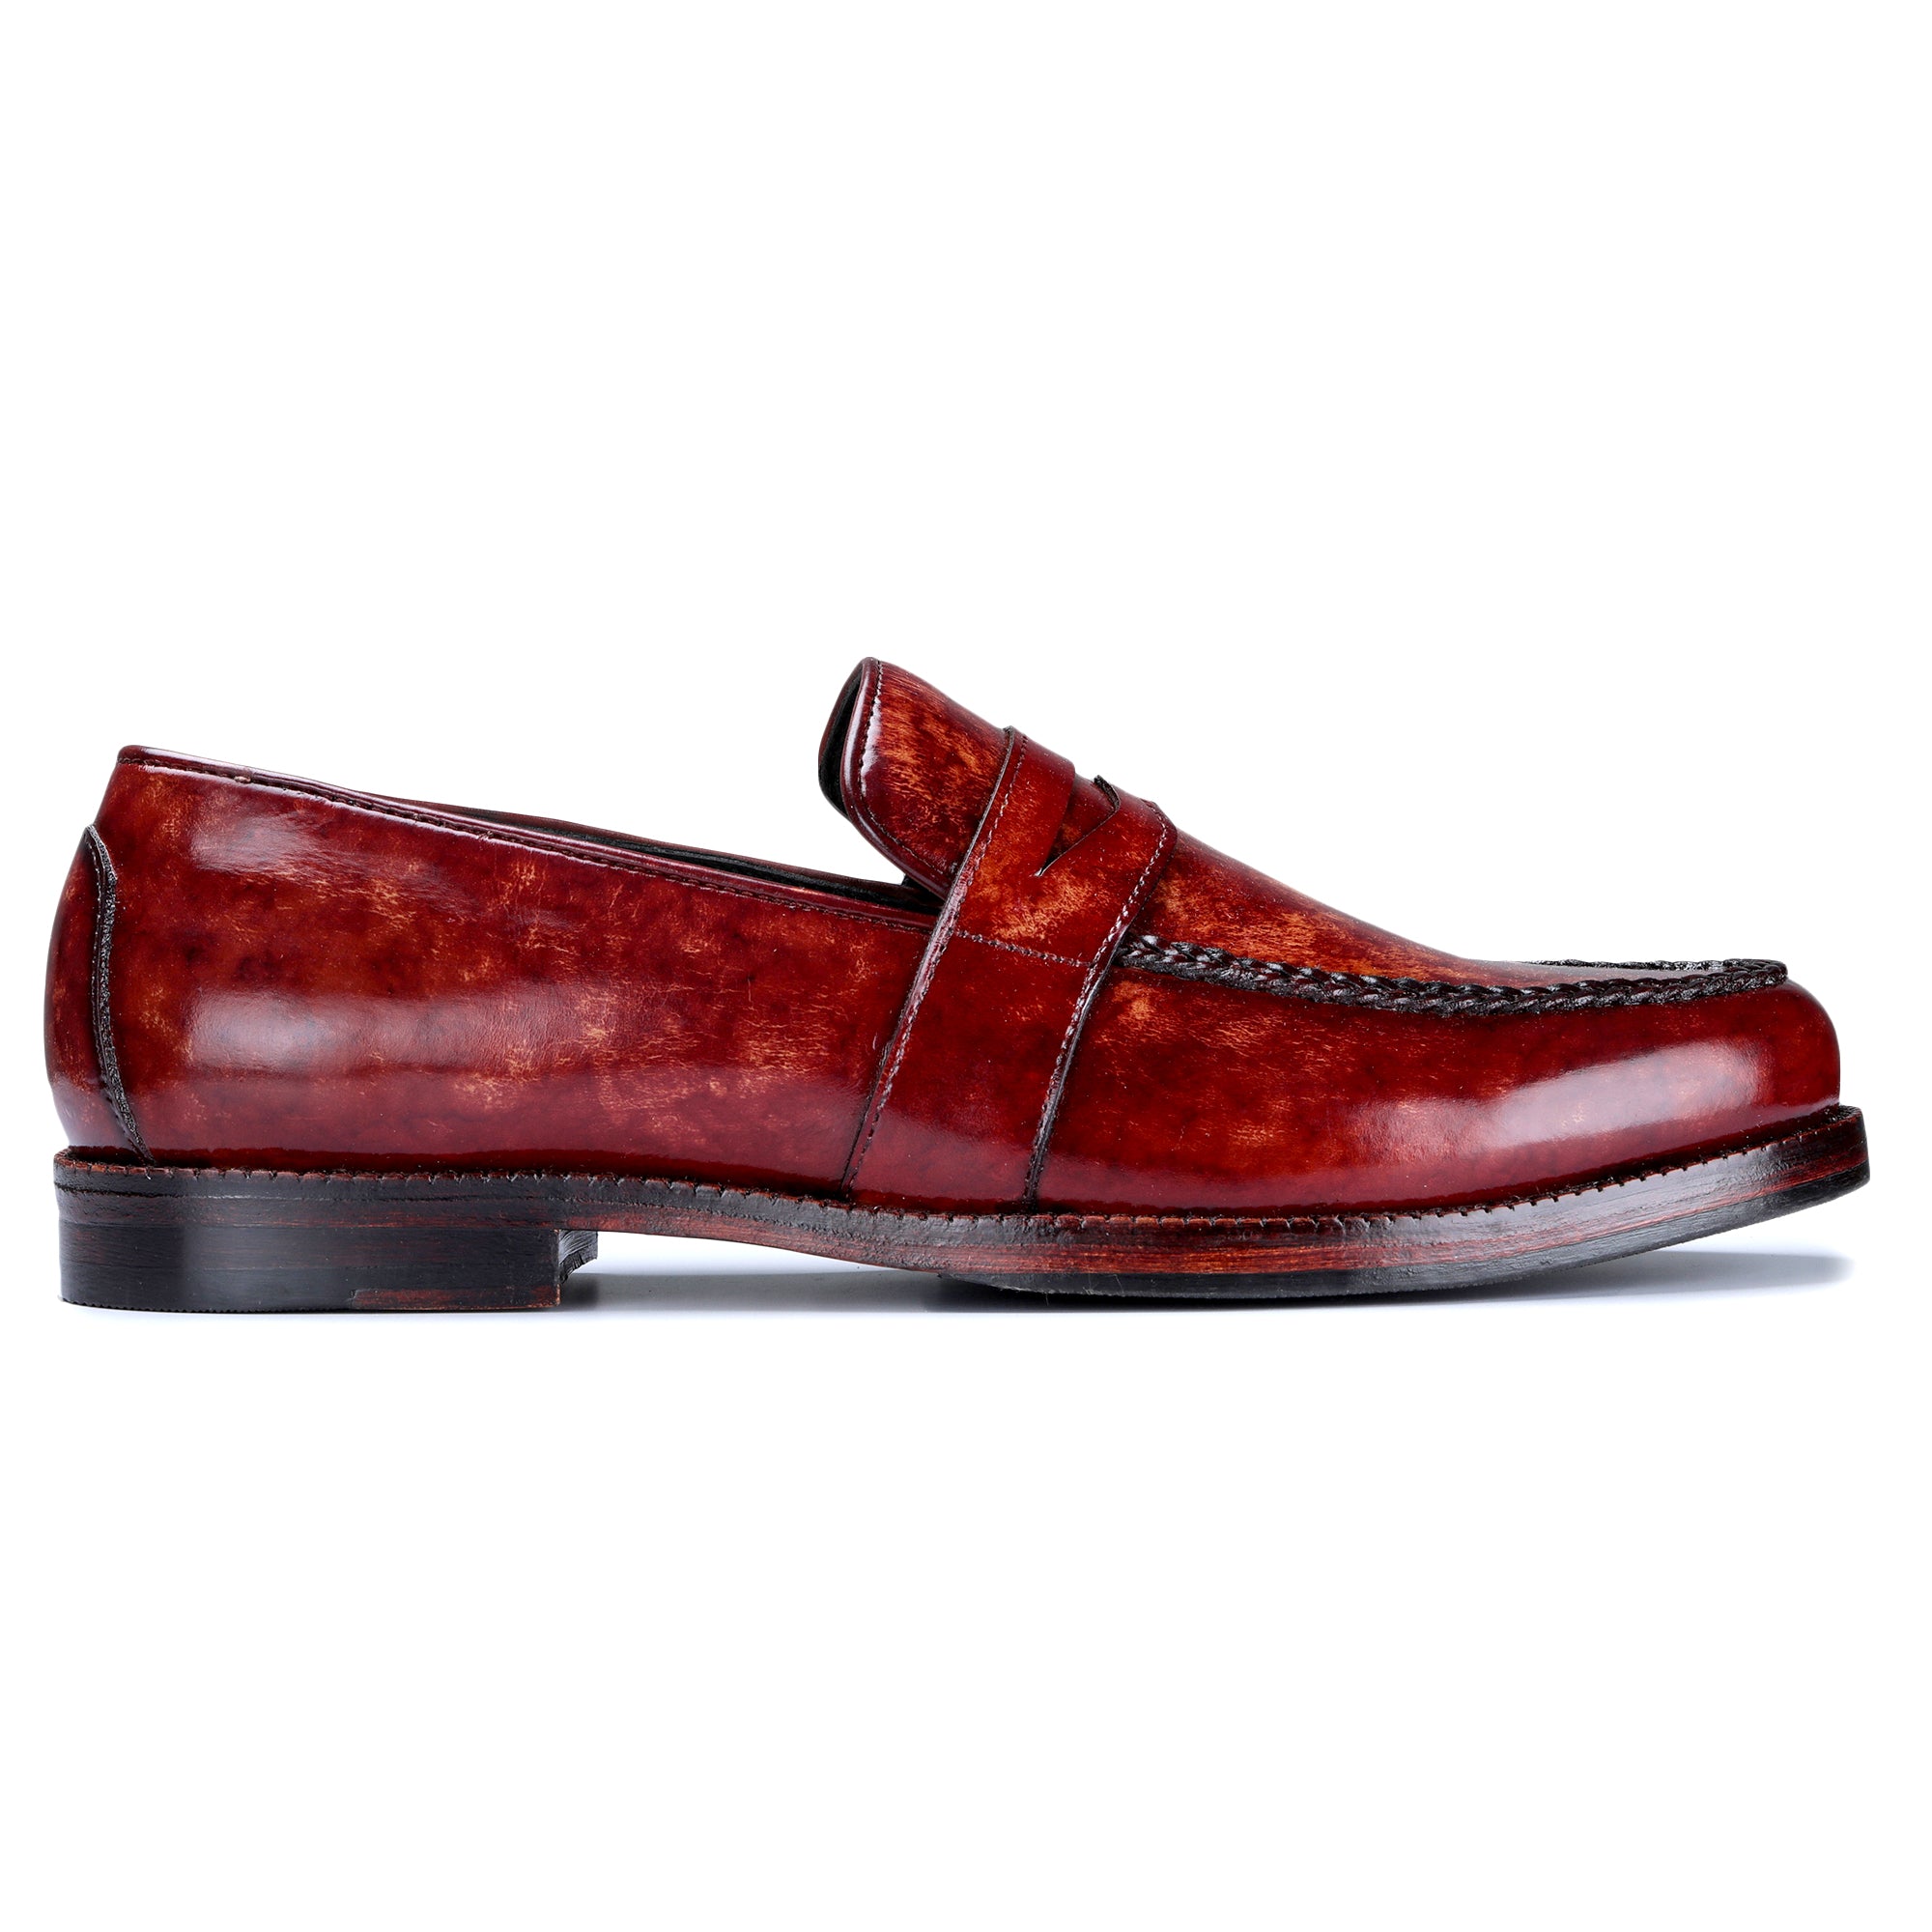 Buy Lethato Driver Loafers - Reddish Brown